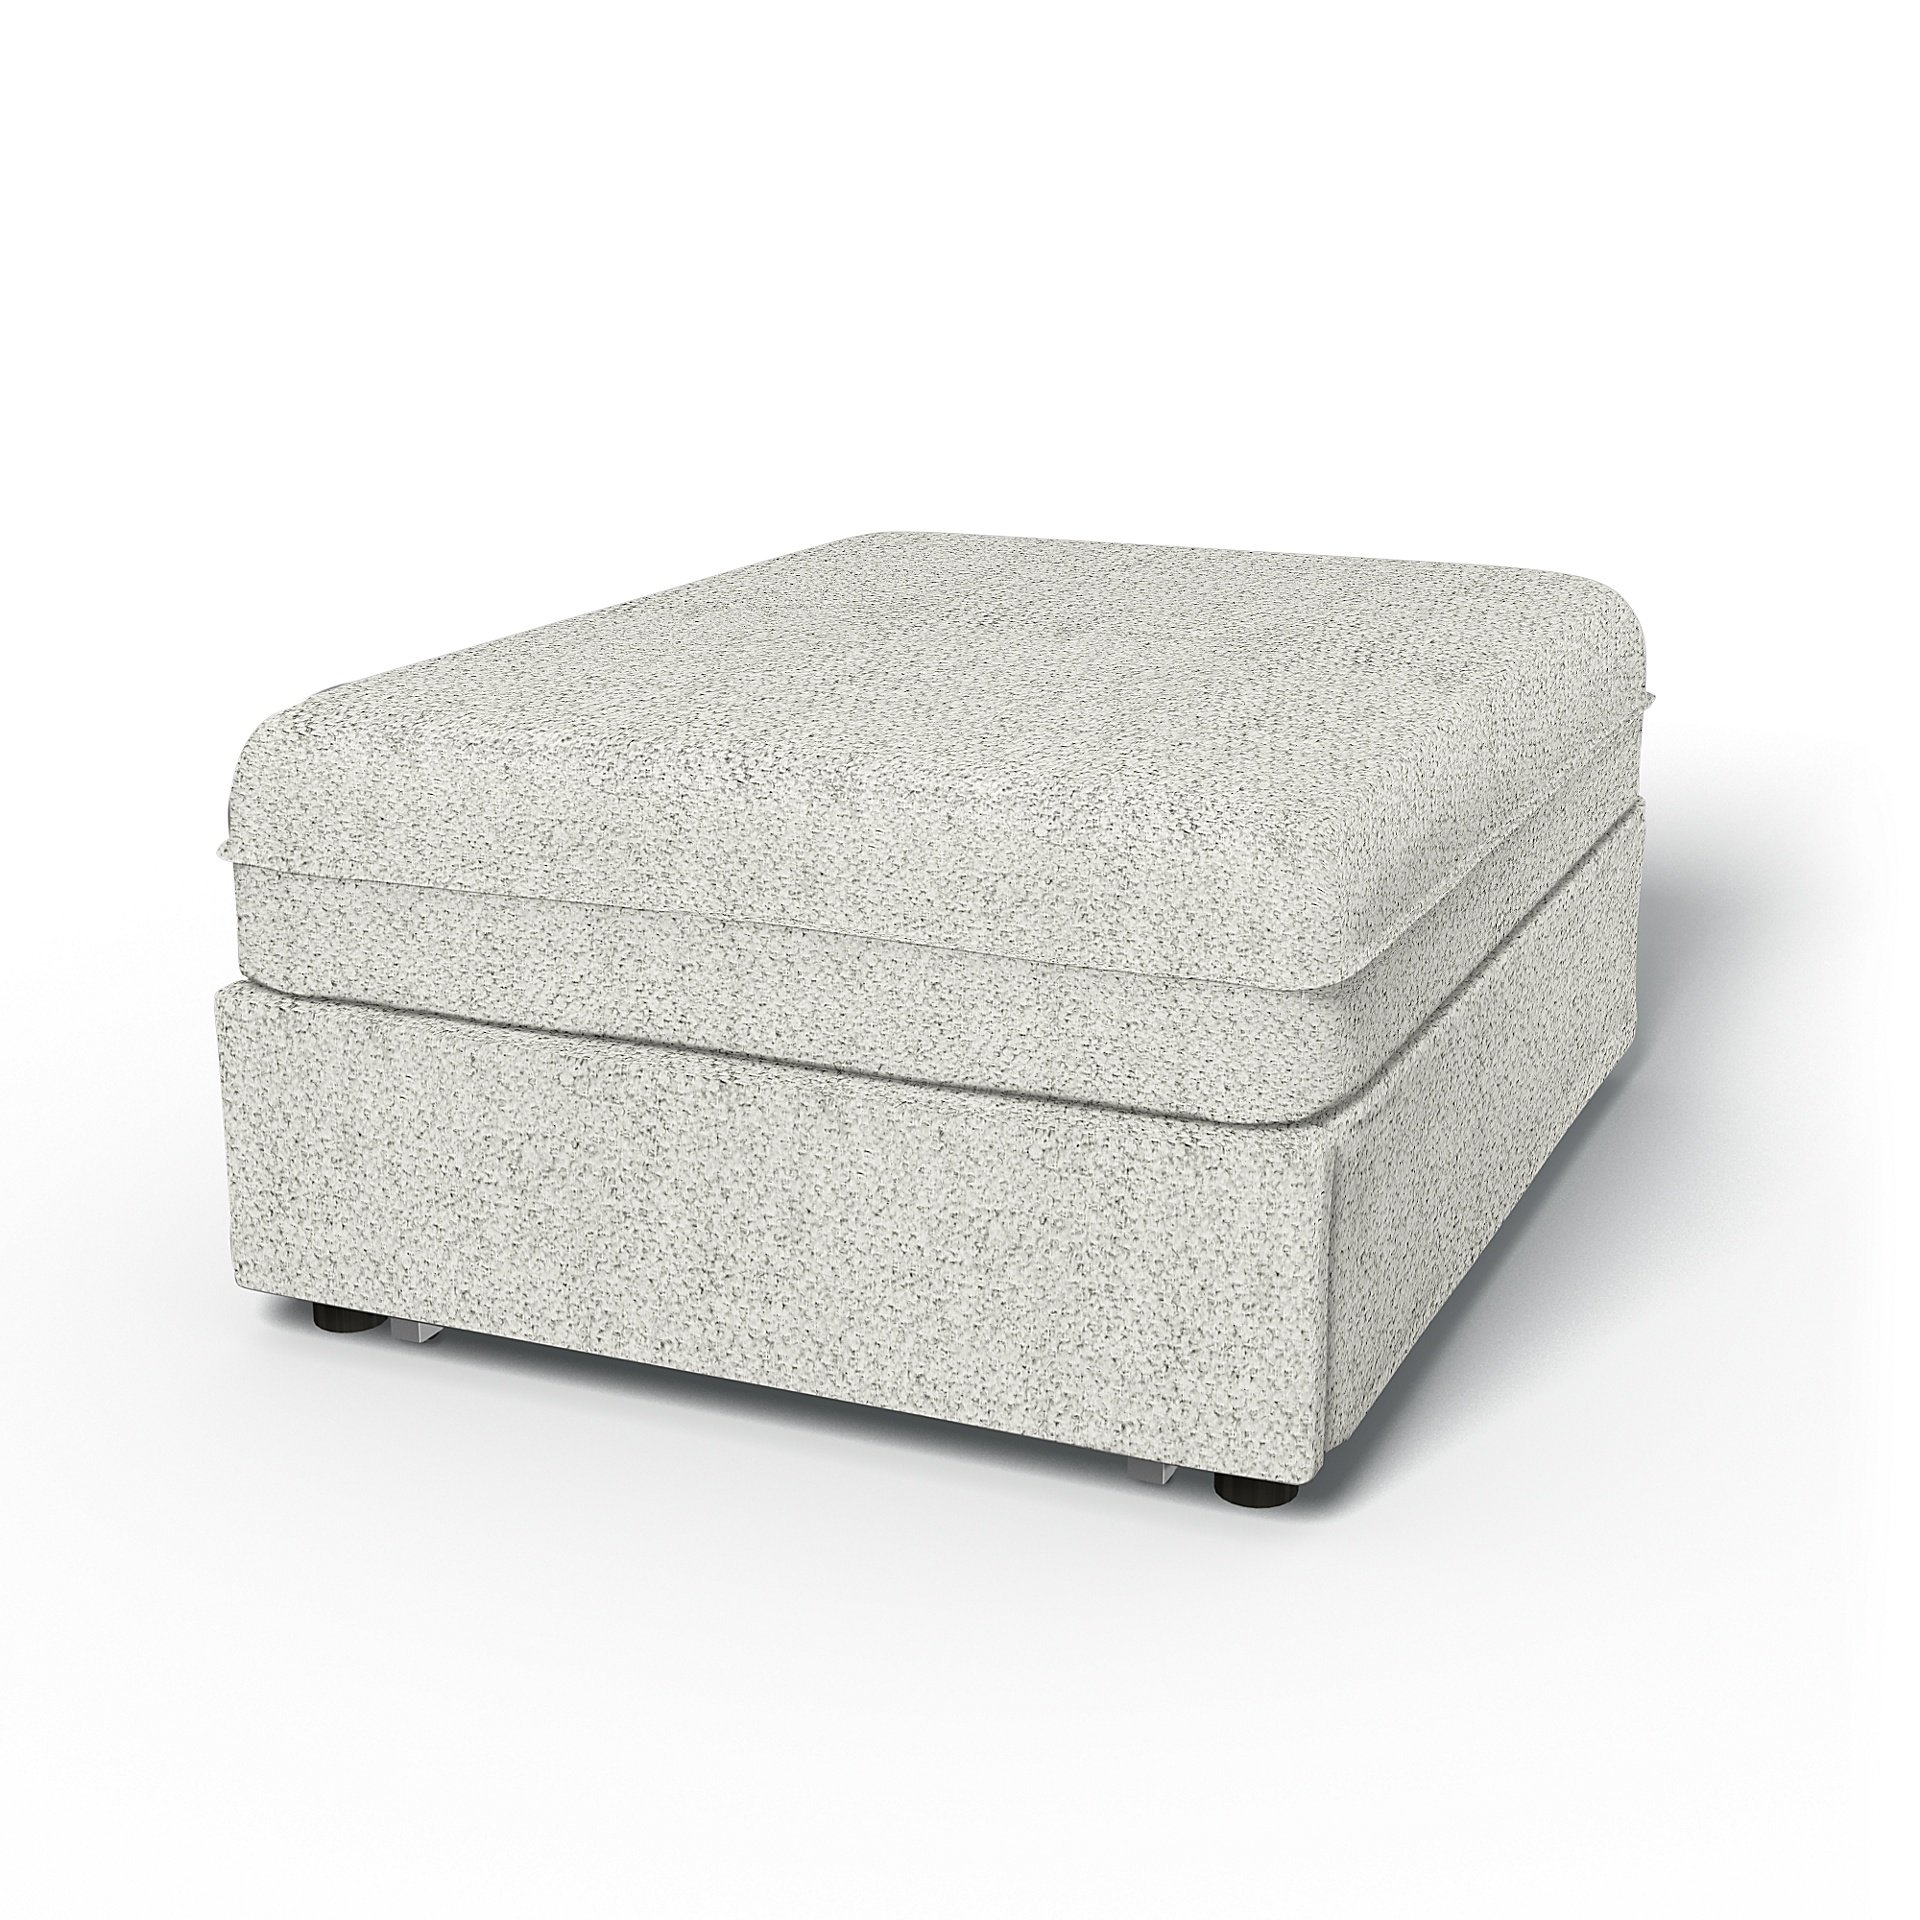 IKEA - Vallentuna Seat Module with Sofa Bed Cover 80x100cm 32x39in, Ivory, Boucle & Texture - Bemz